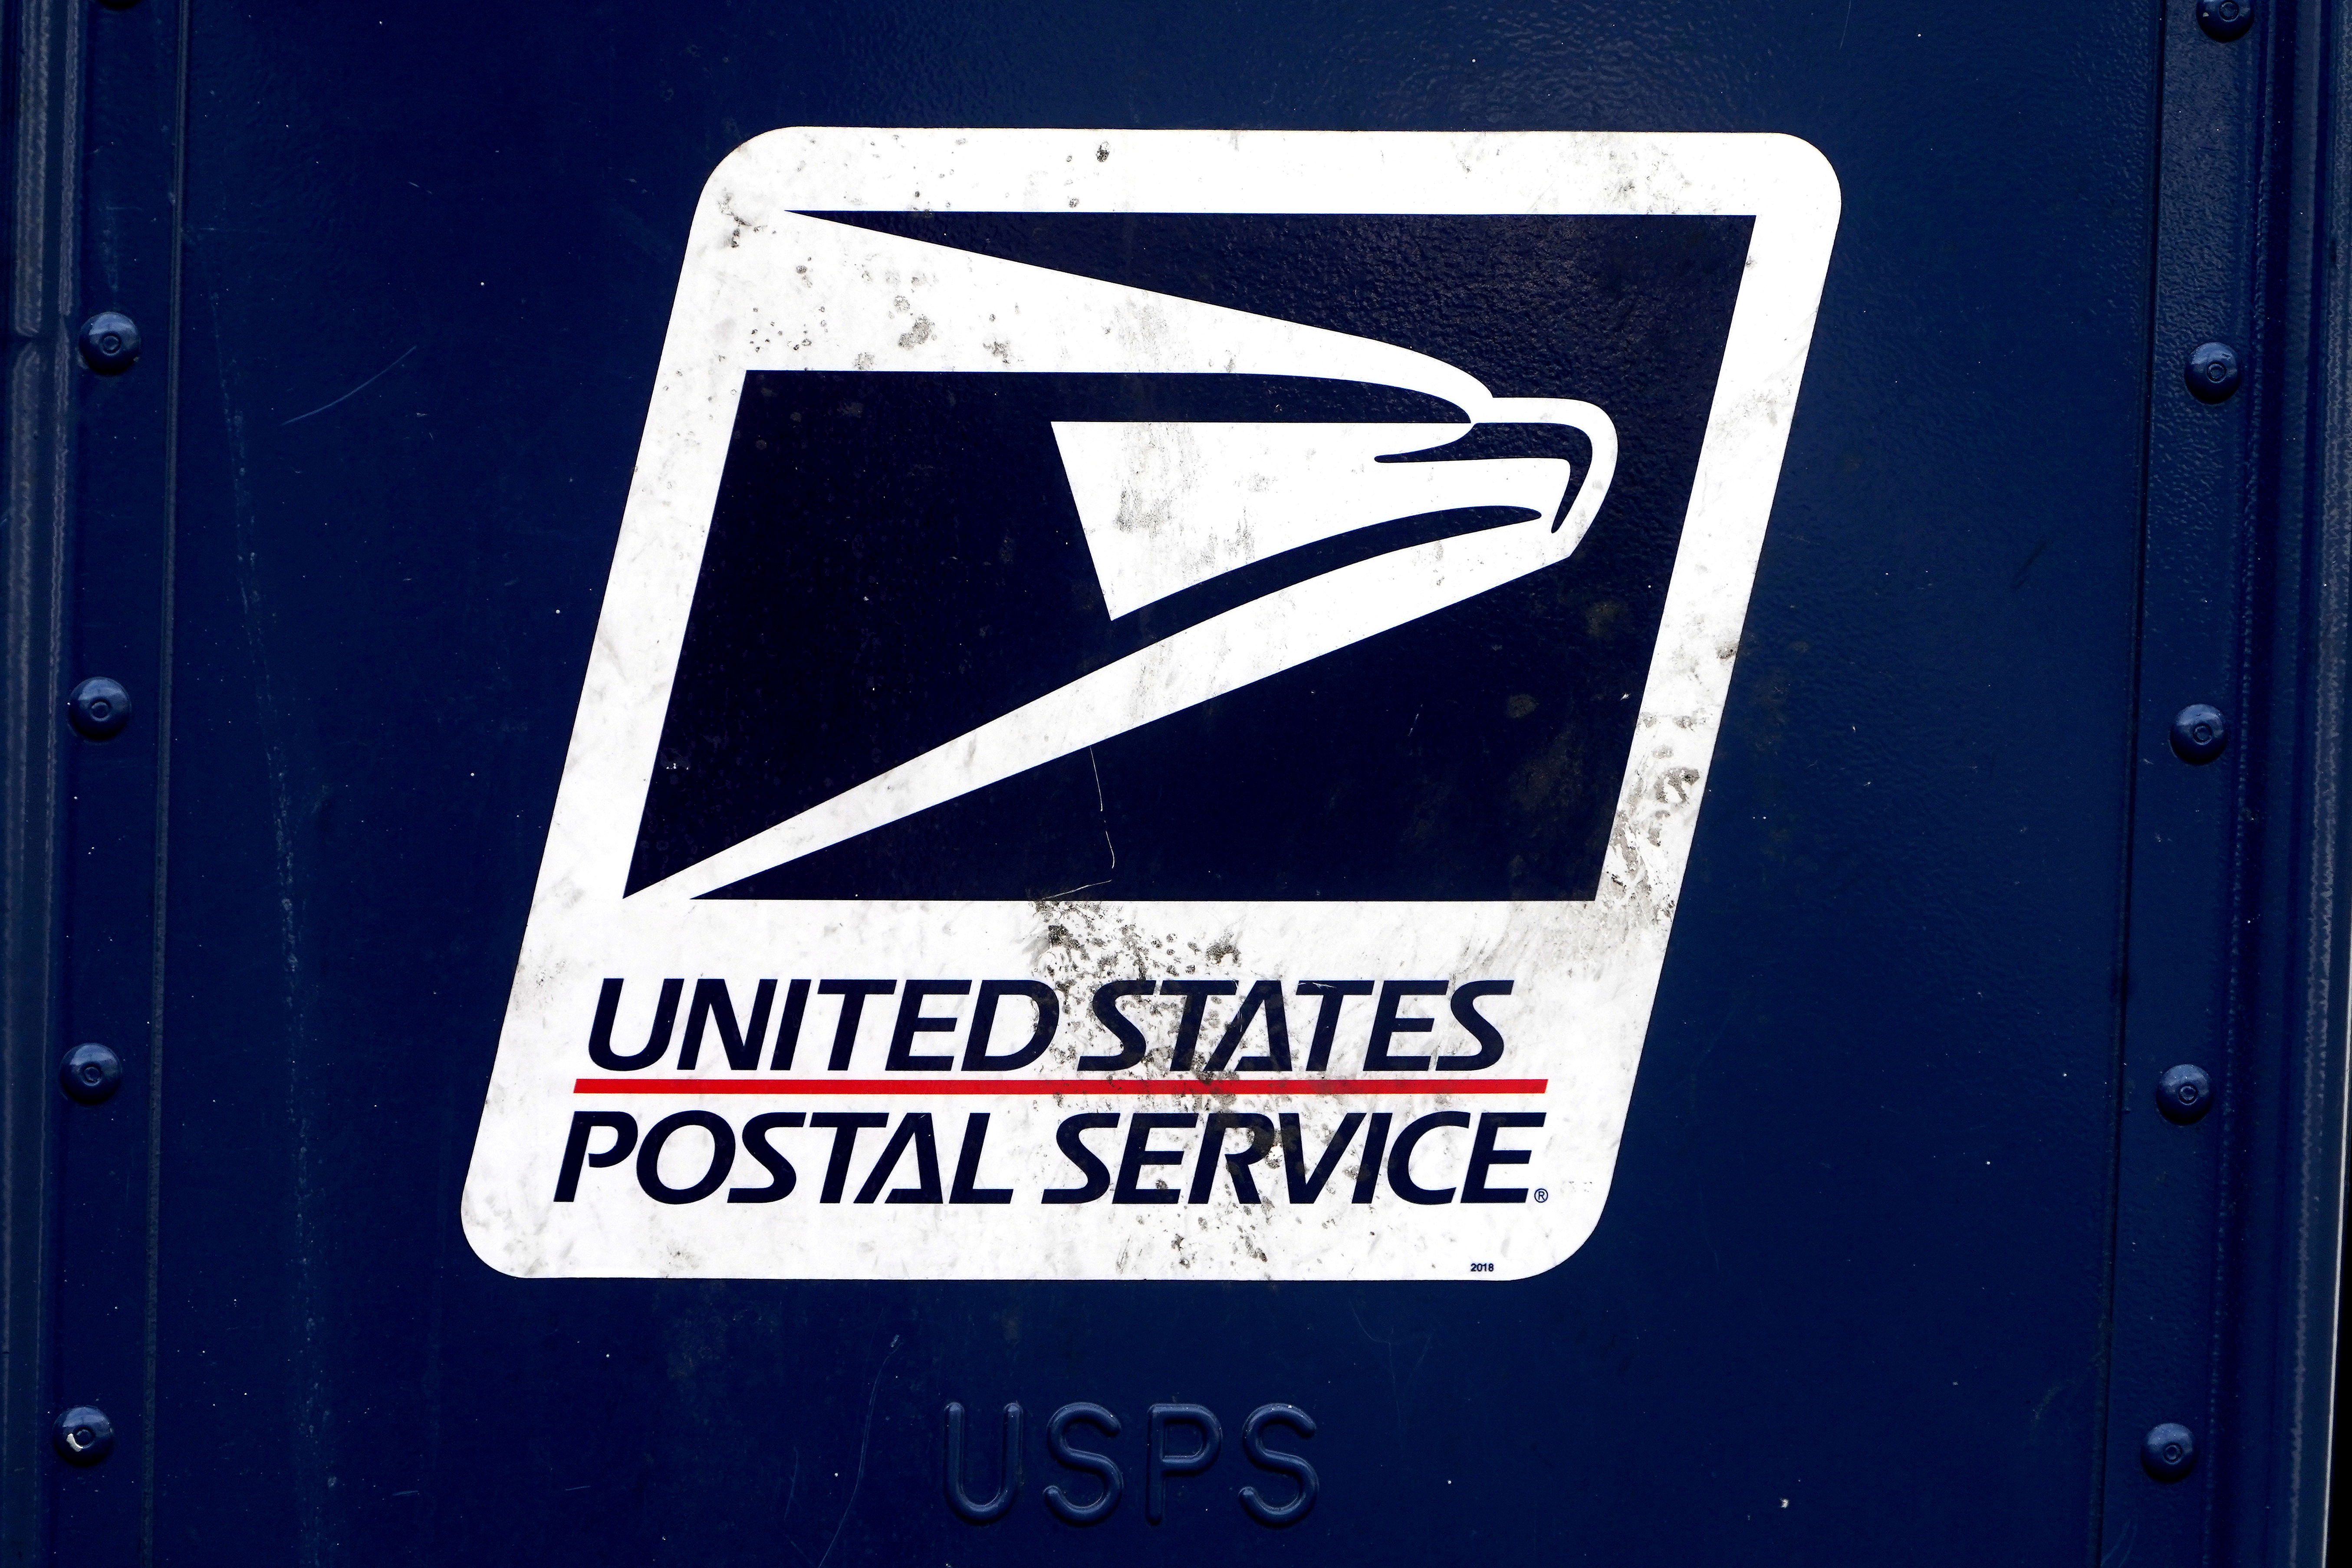 A U.S. Postal Service (USPS) logo is pictured on a mail box in the Manhattan borough of New York City, New York, U.S., August 21, 2020. REUTERS/Carlo Allegri